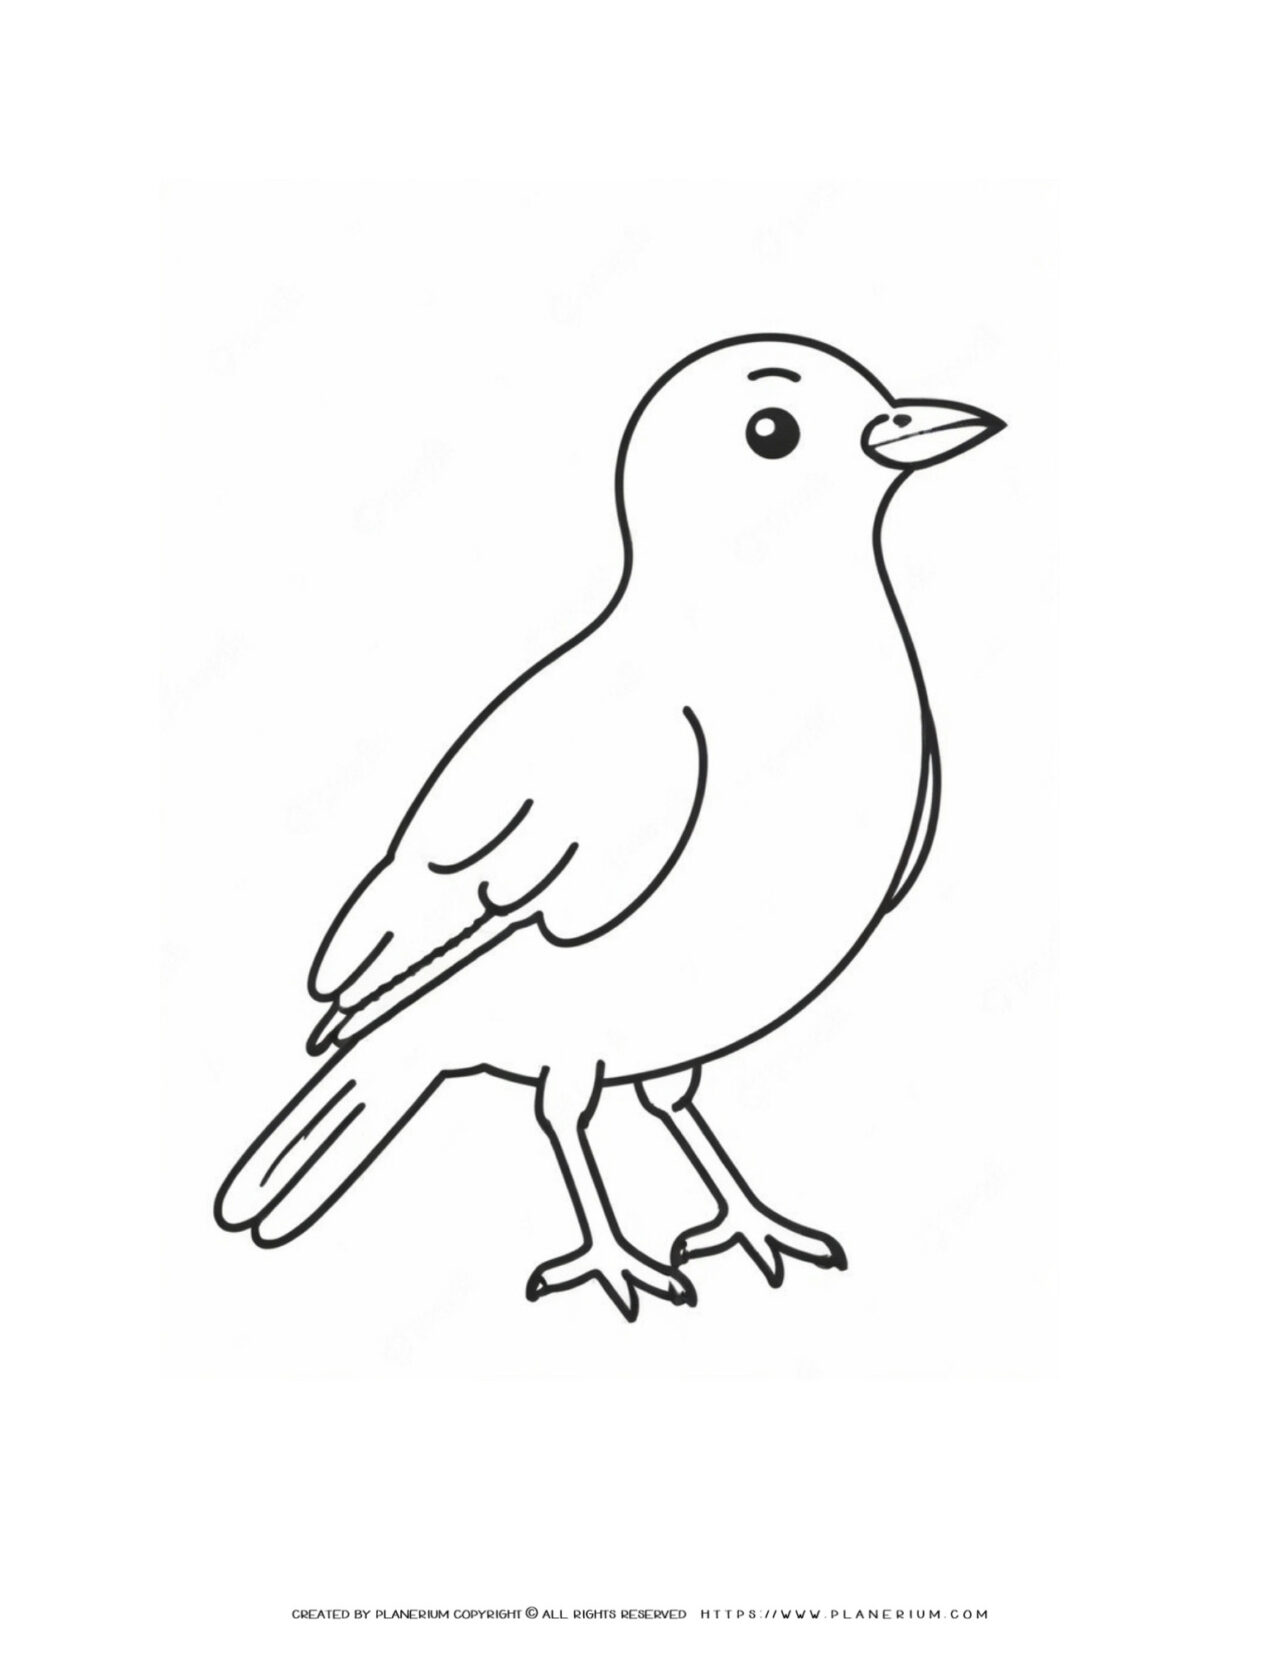 Little-Bird-with-Big-Dreams-Beginner-Bird-Coloring-Page